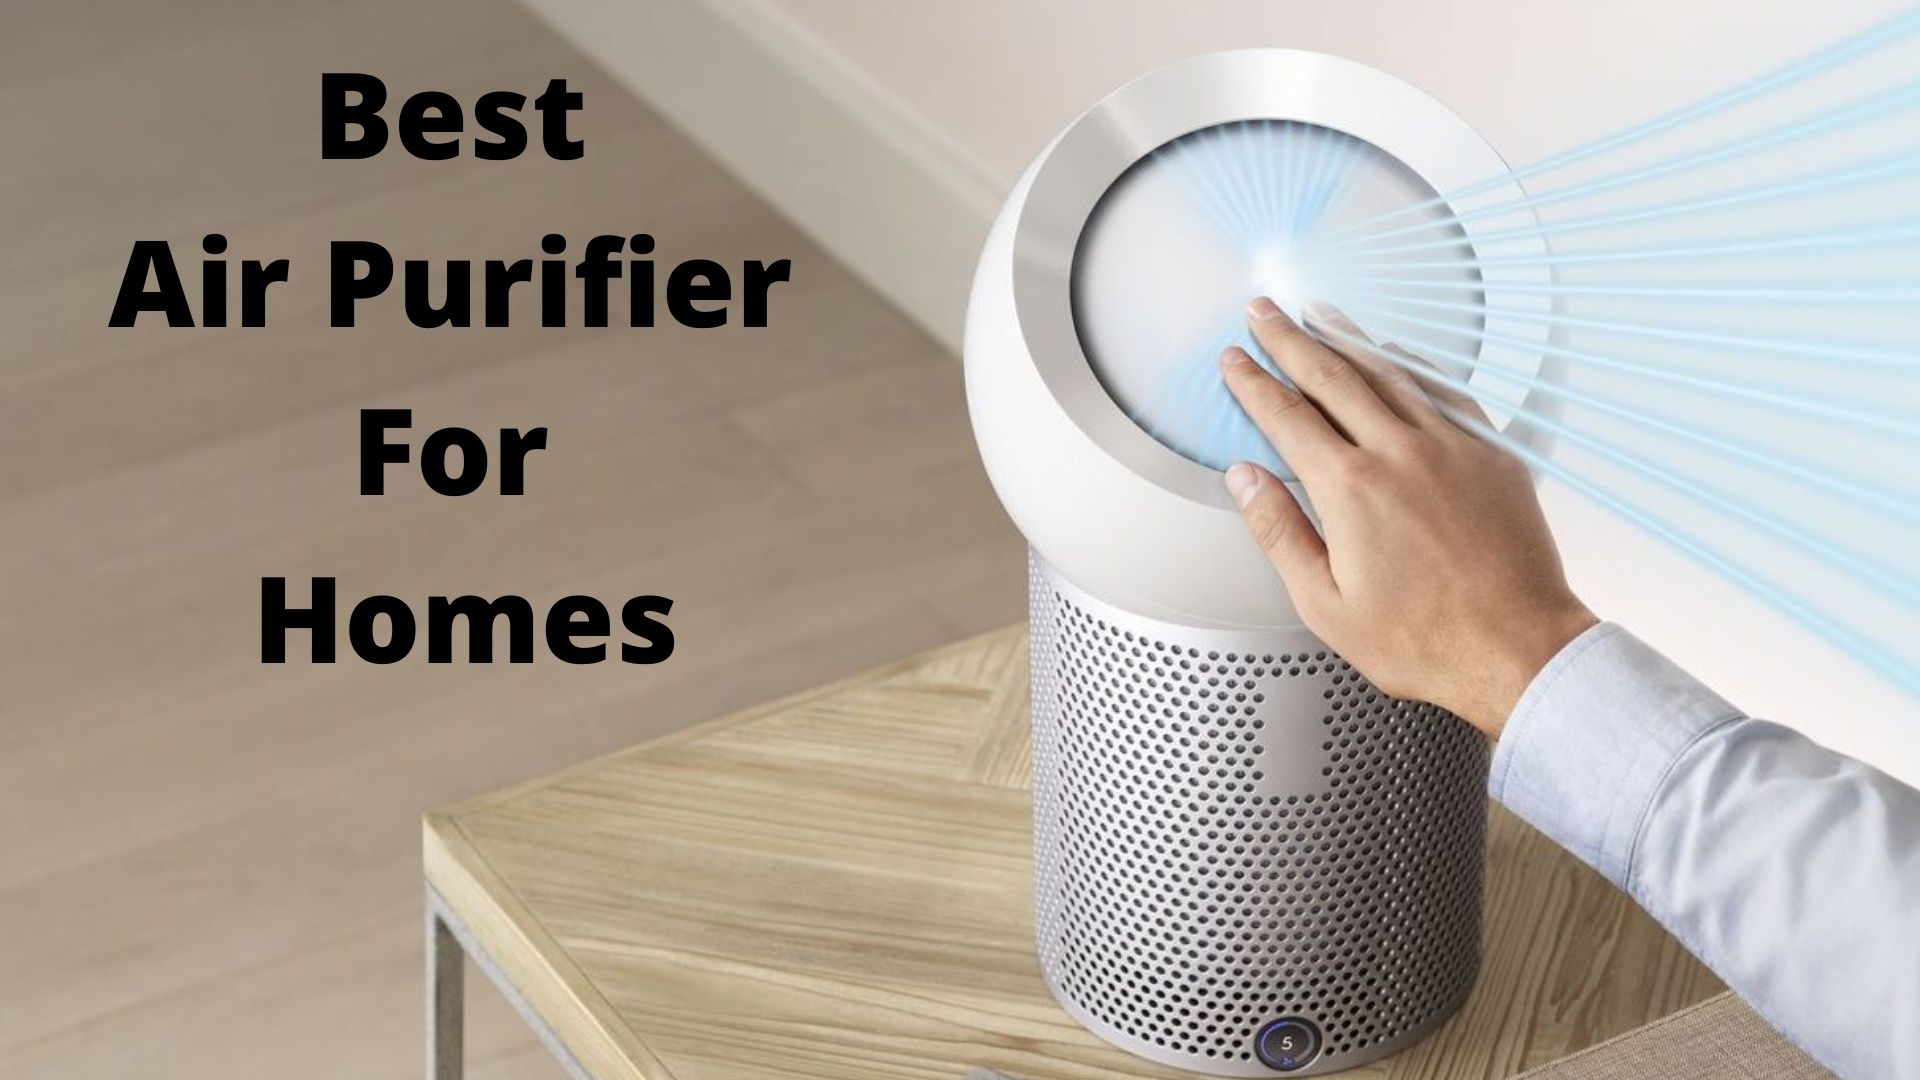 Best Air Purifier For Homes